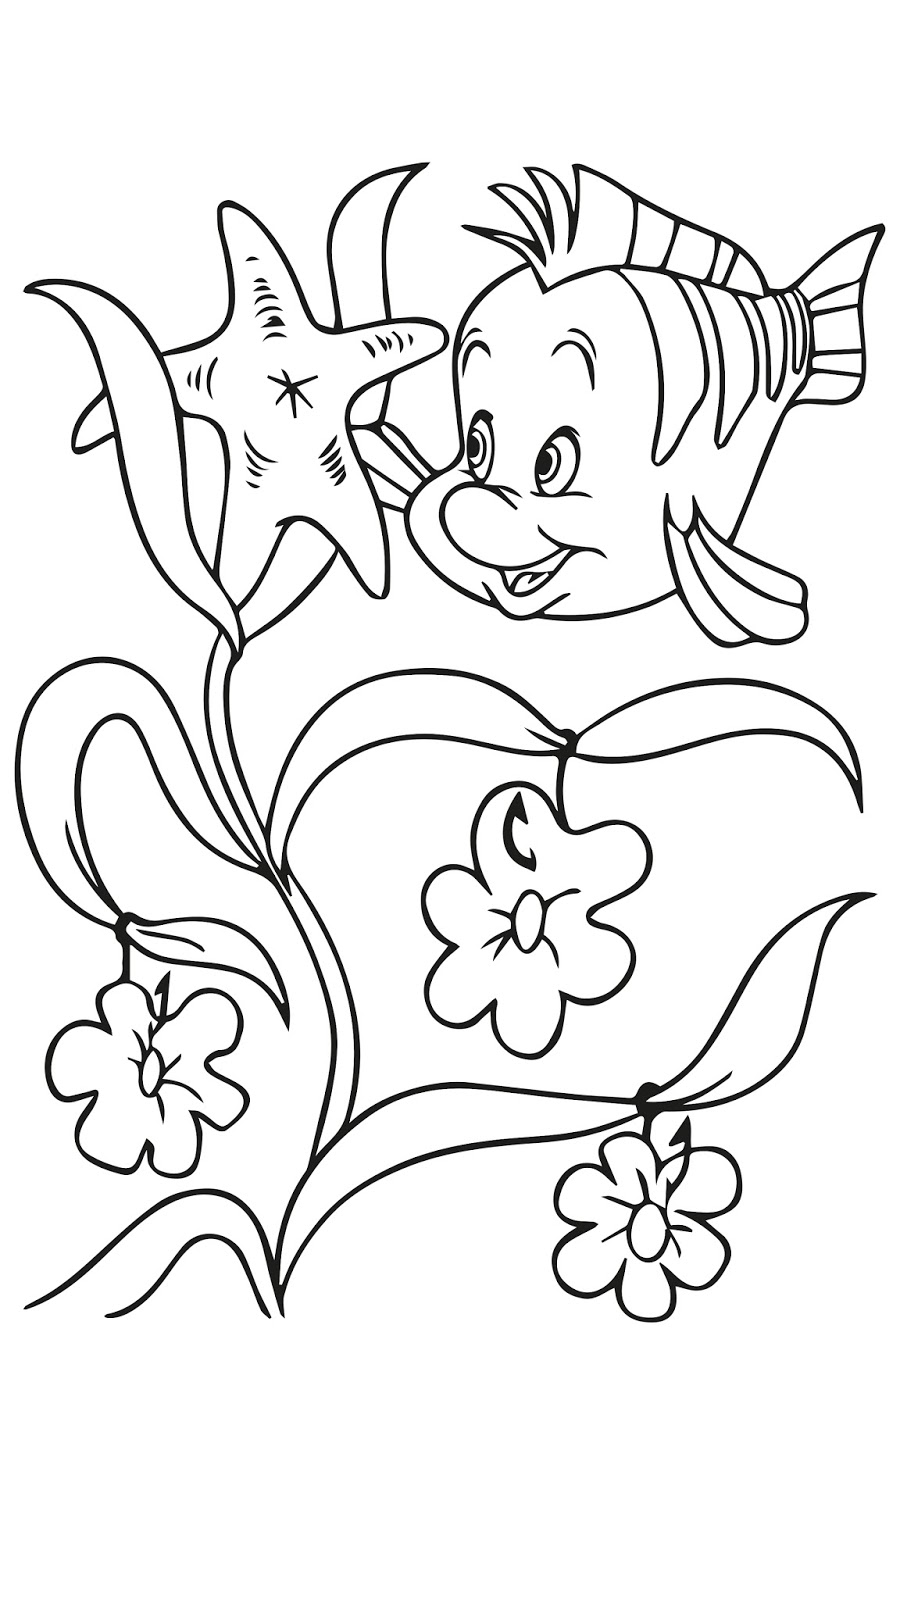 Free Videos For Kids Free Printable Coloring Pages For Kids